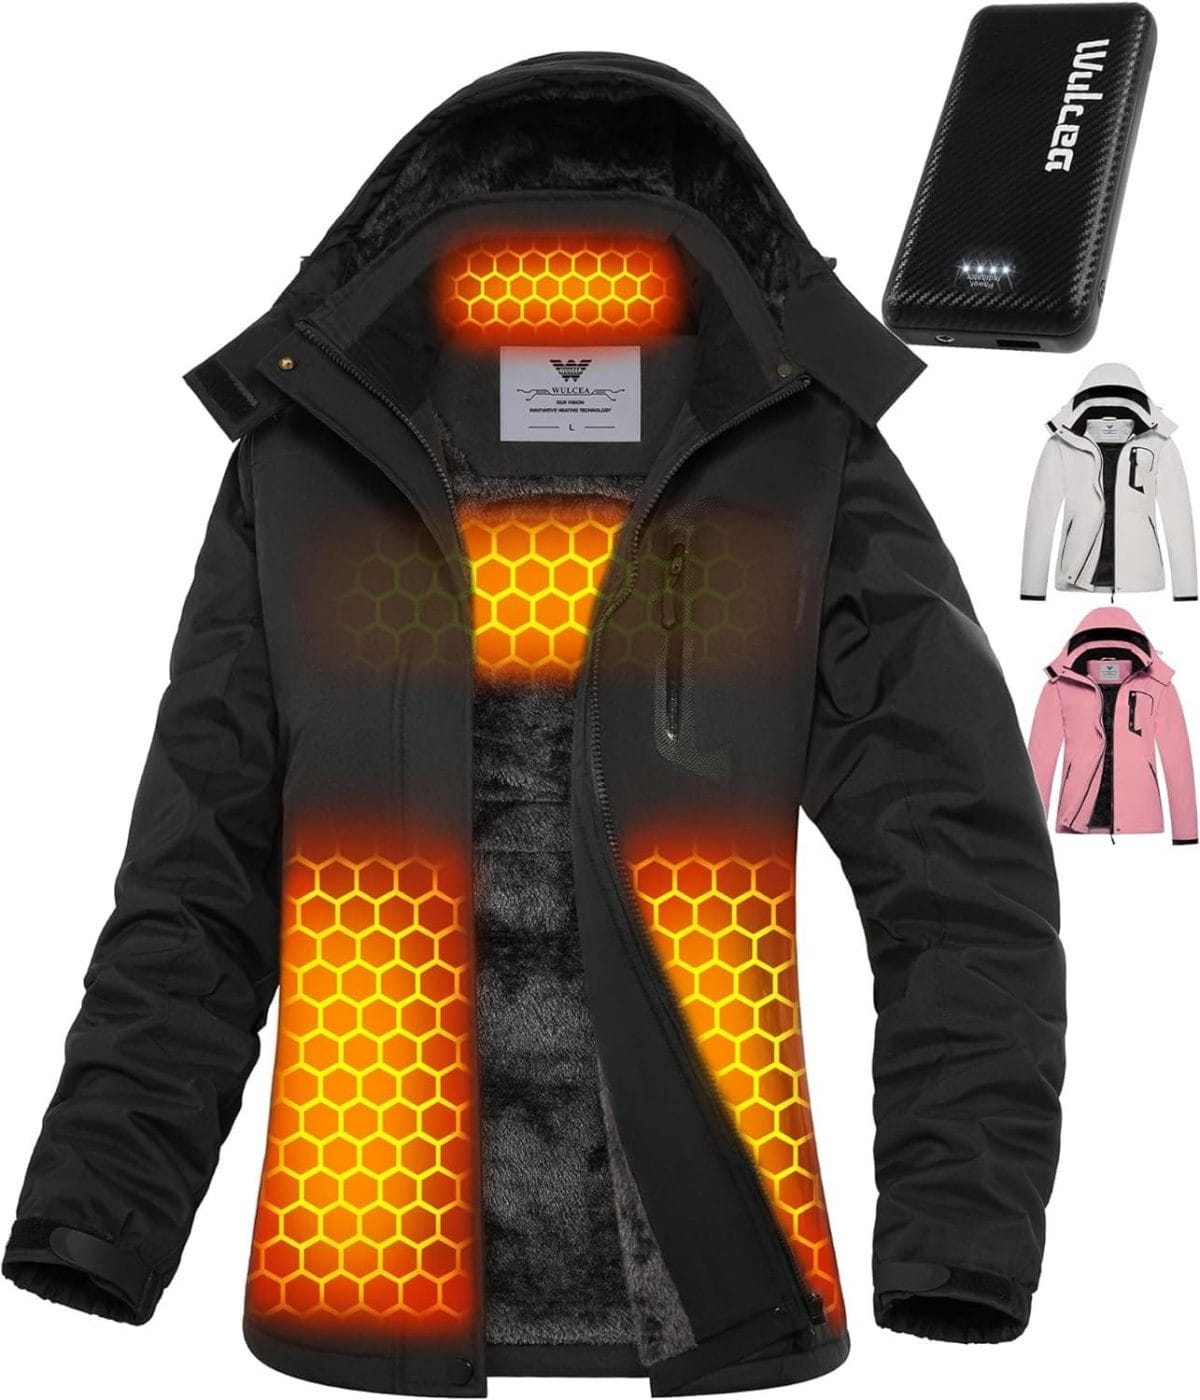 Wulcea Women Graphene Heated Jacket 7.4V Battery Pack Charger Ladies Electric Warming Coat